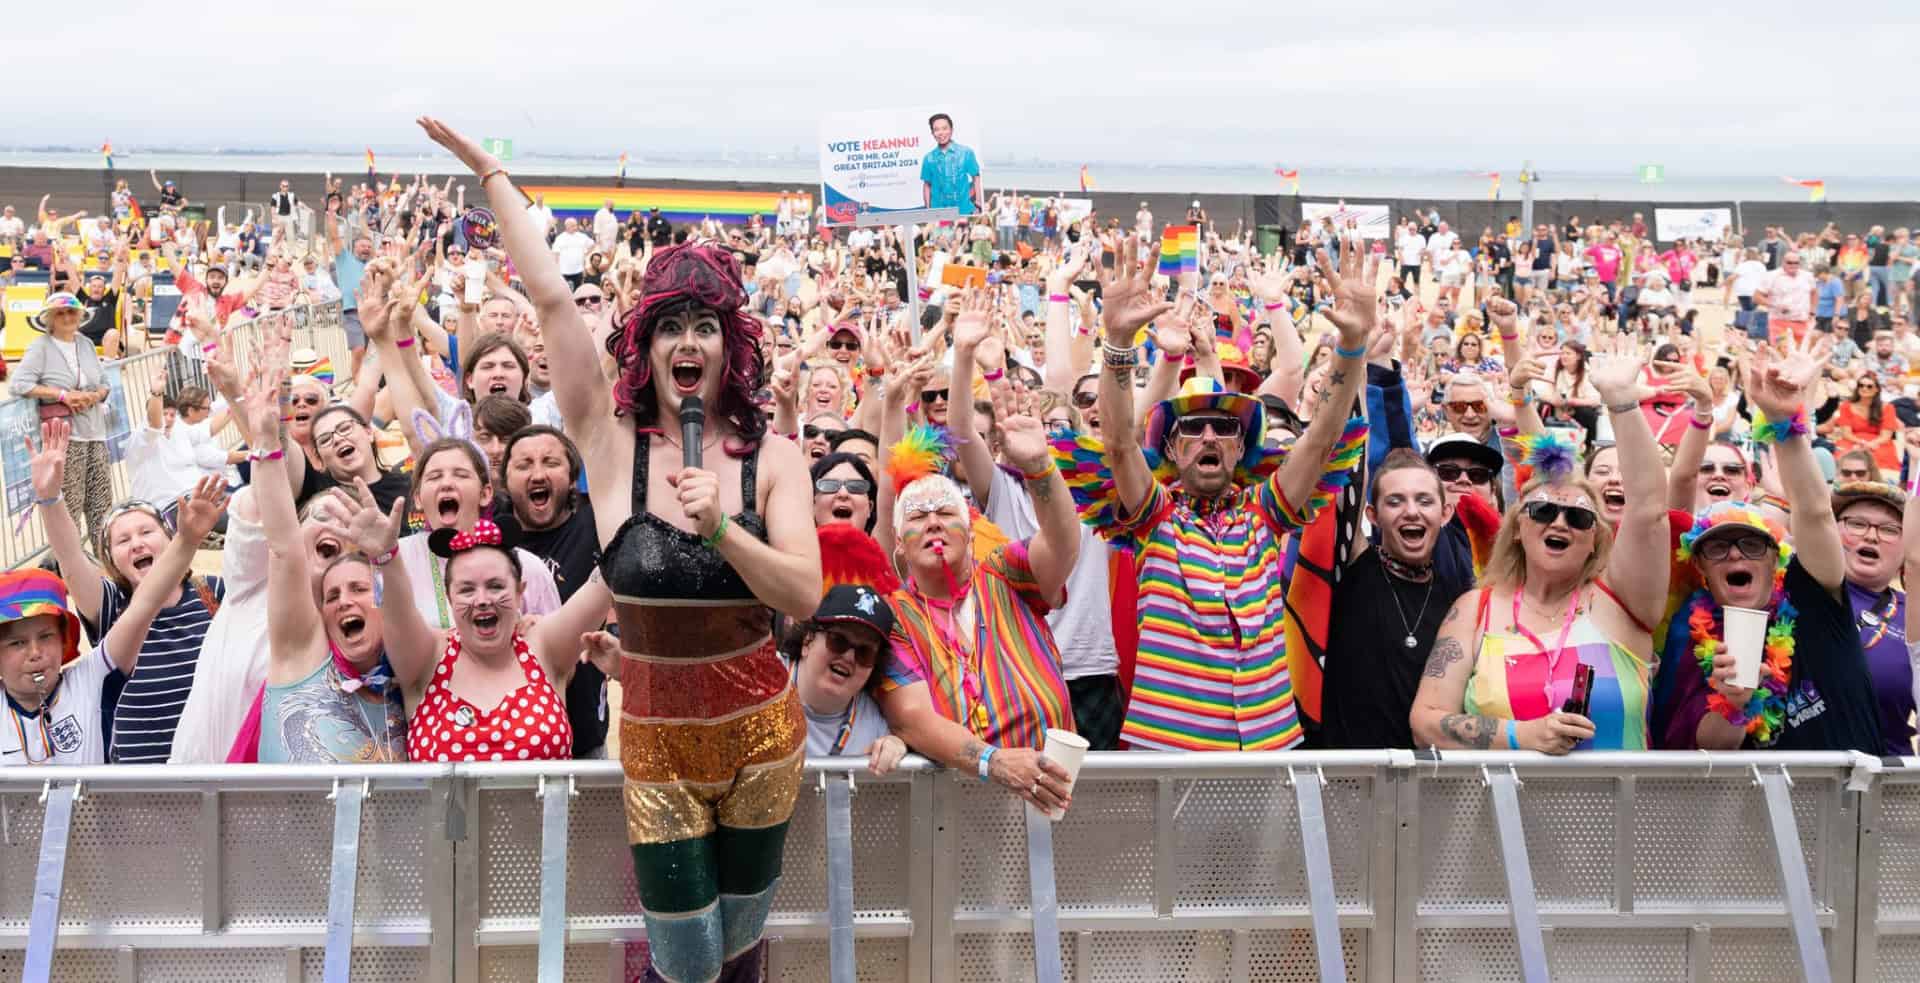 The crowds at Isle of Wight Pride